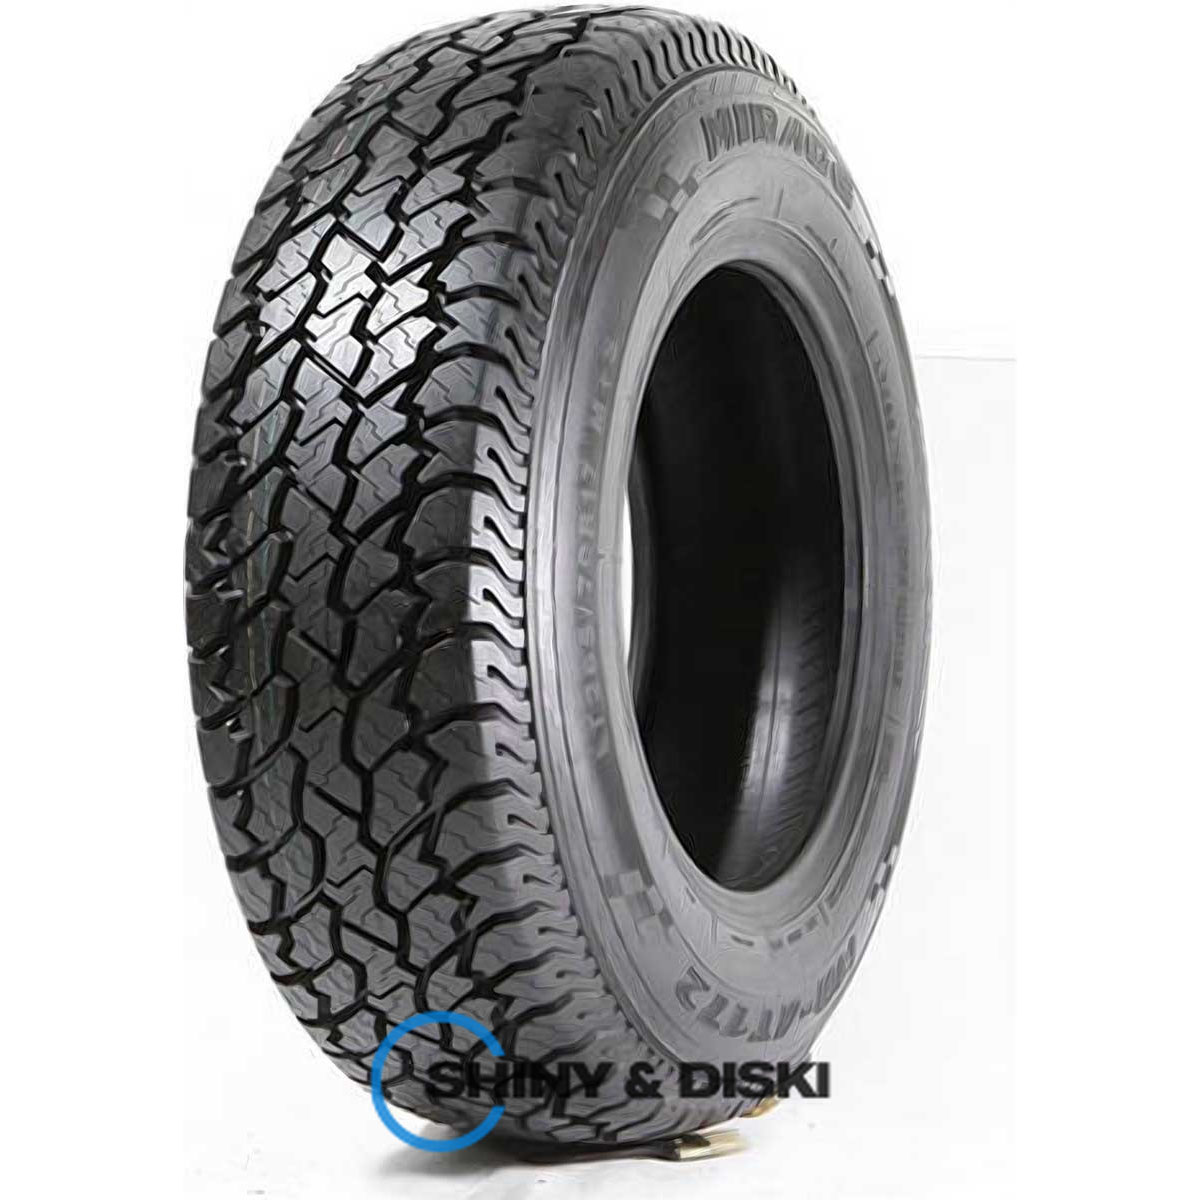 mirage mr-at172 235/70 r16 106t